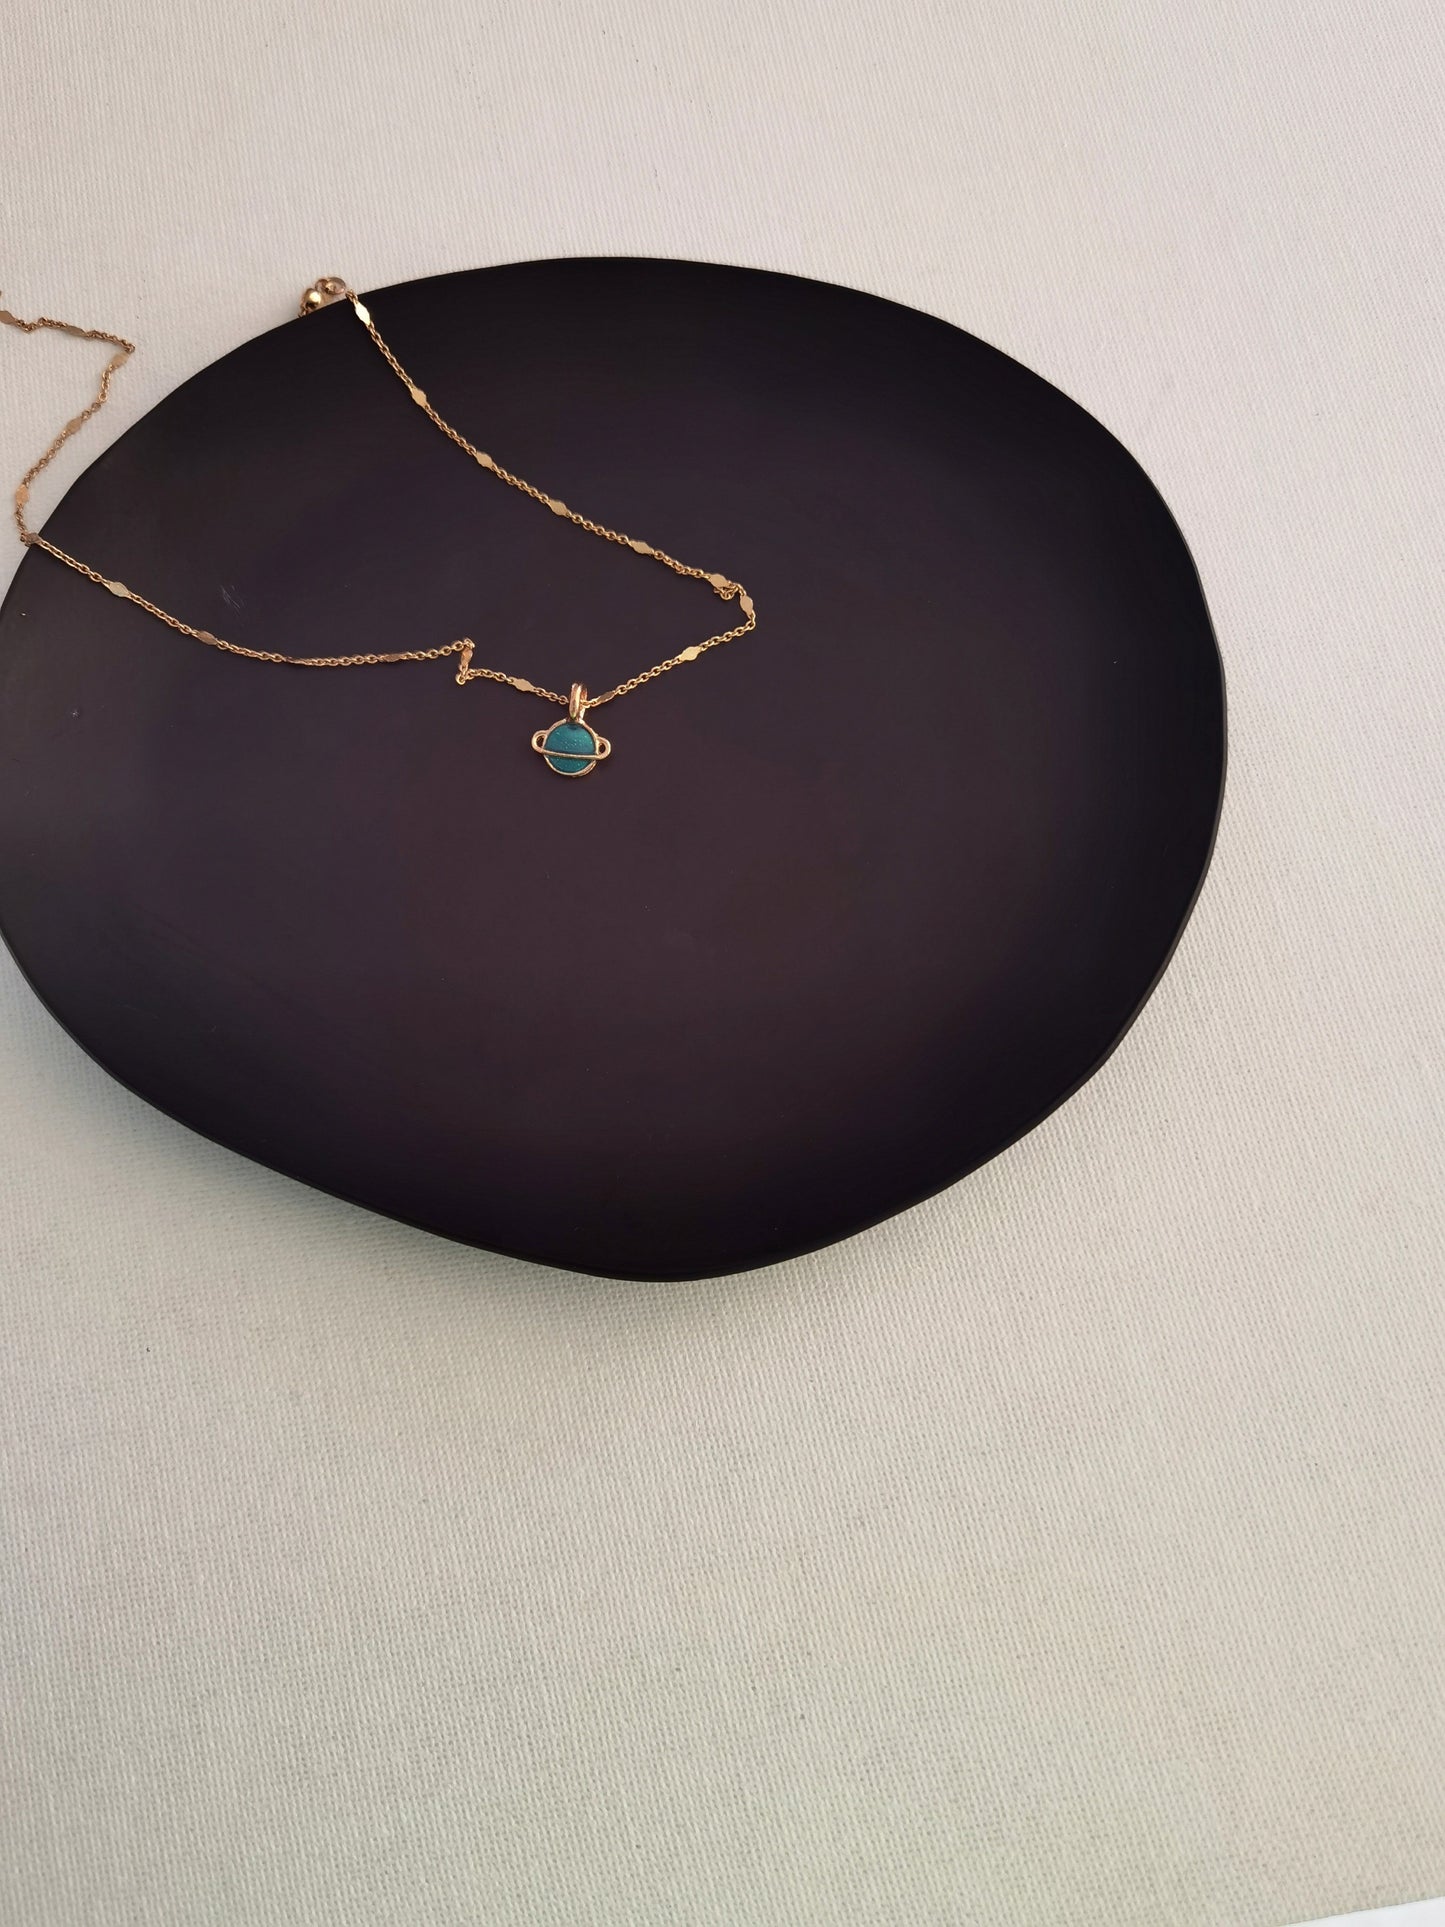 Emerald green necklace and pendant chain set